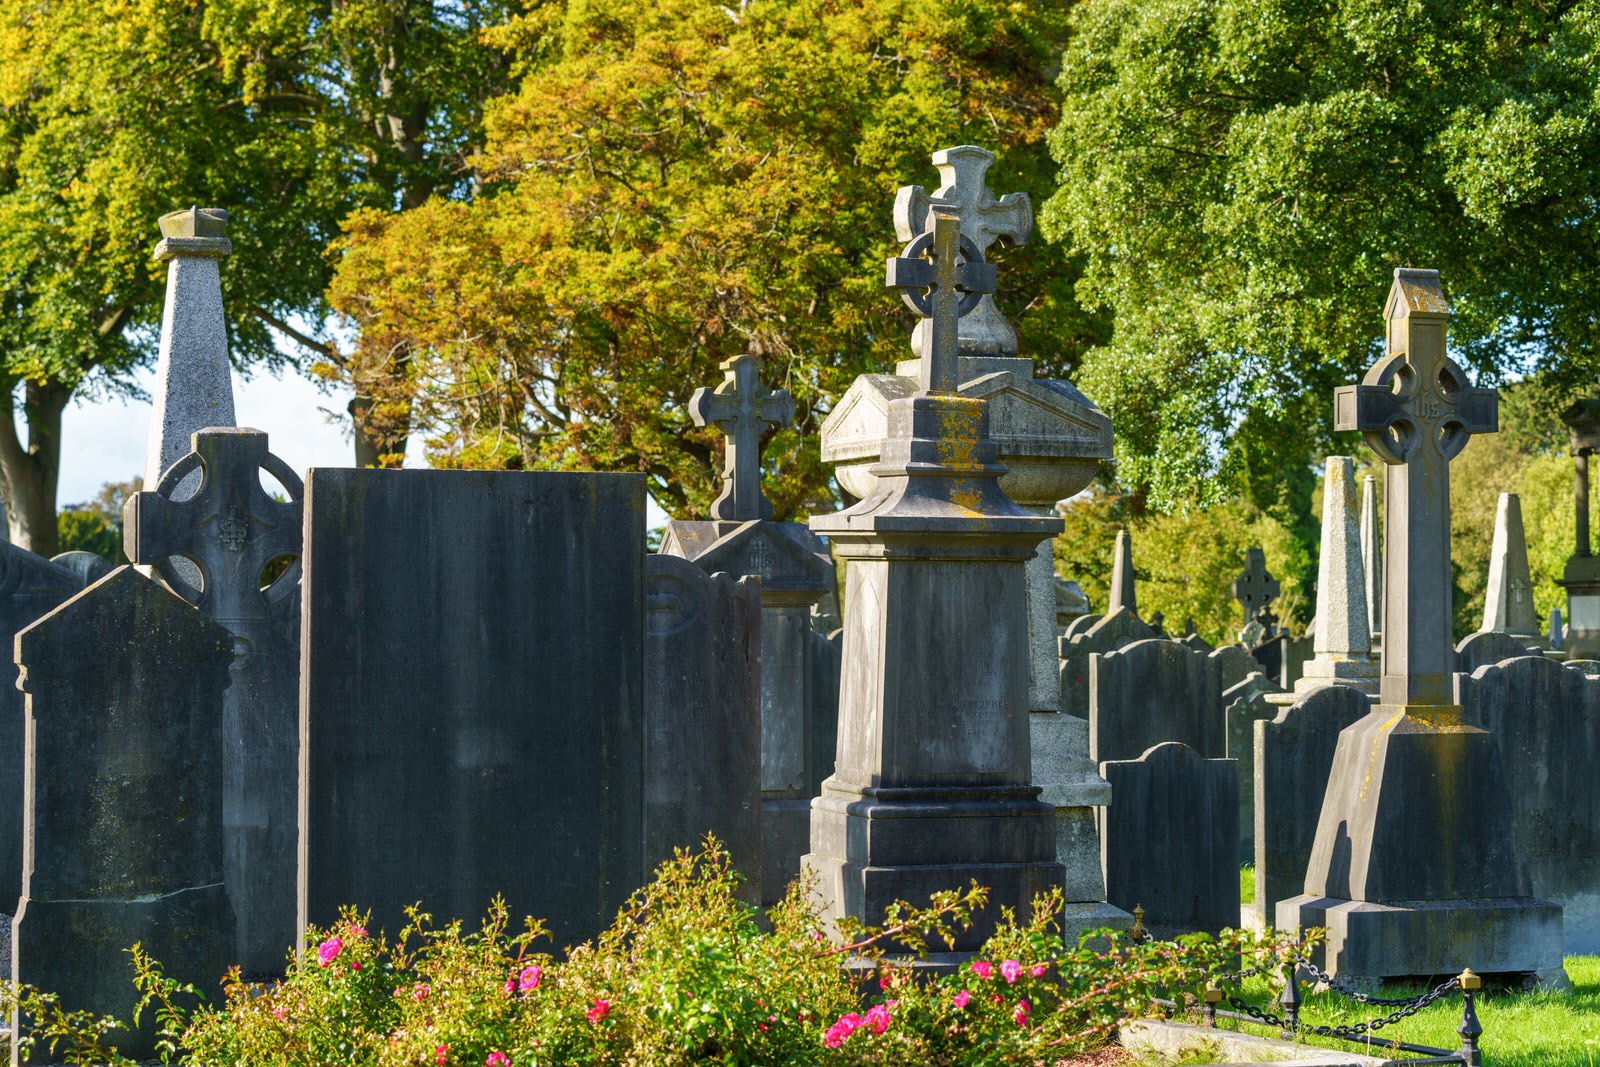 THE OLDER SECTION OF GLASNEVIN CEMETERY [I USED A SONY 70-200MM GM LENS] 005